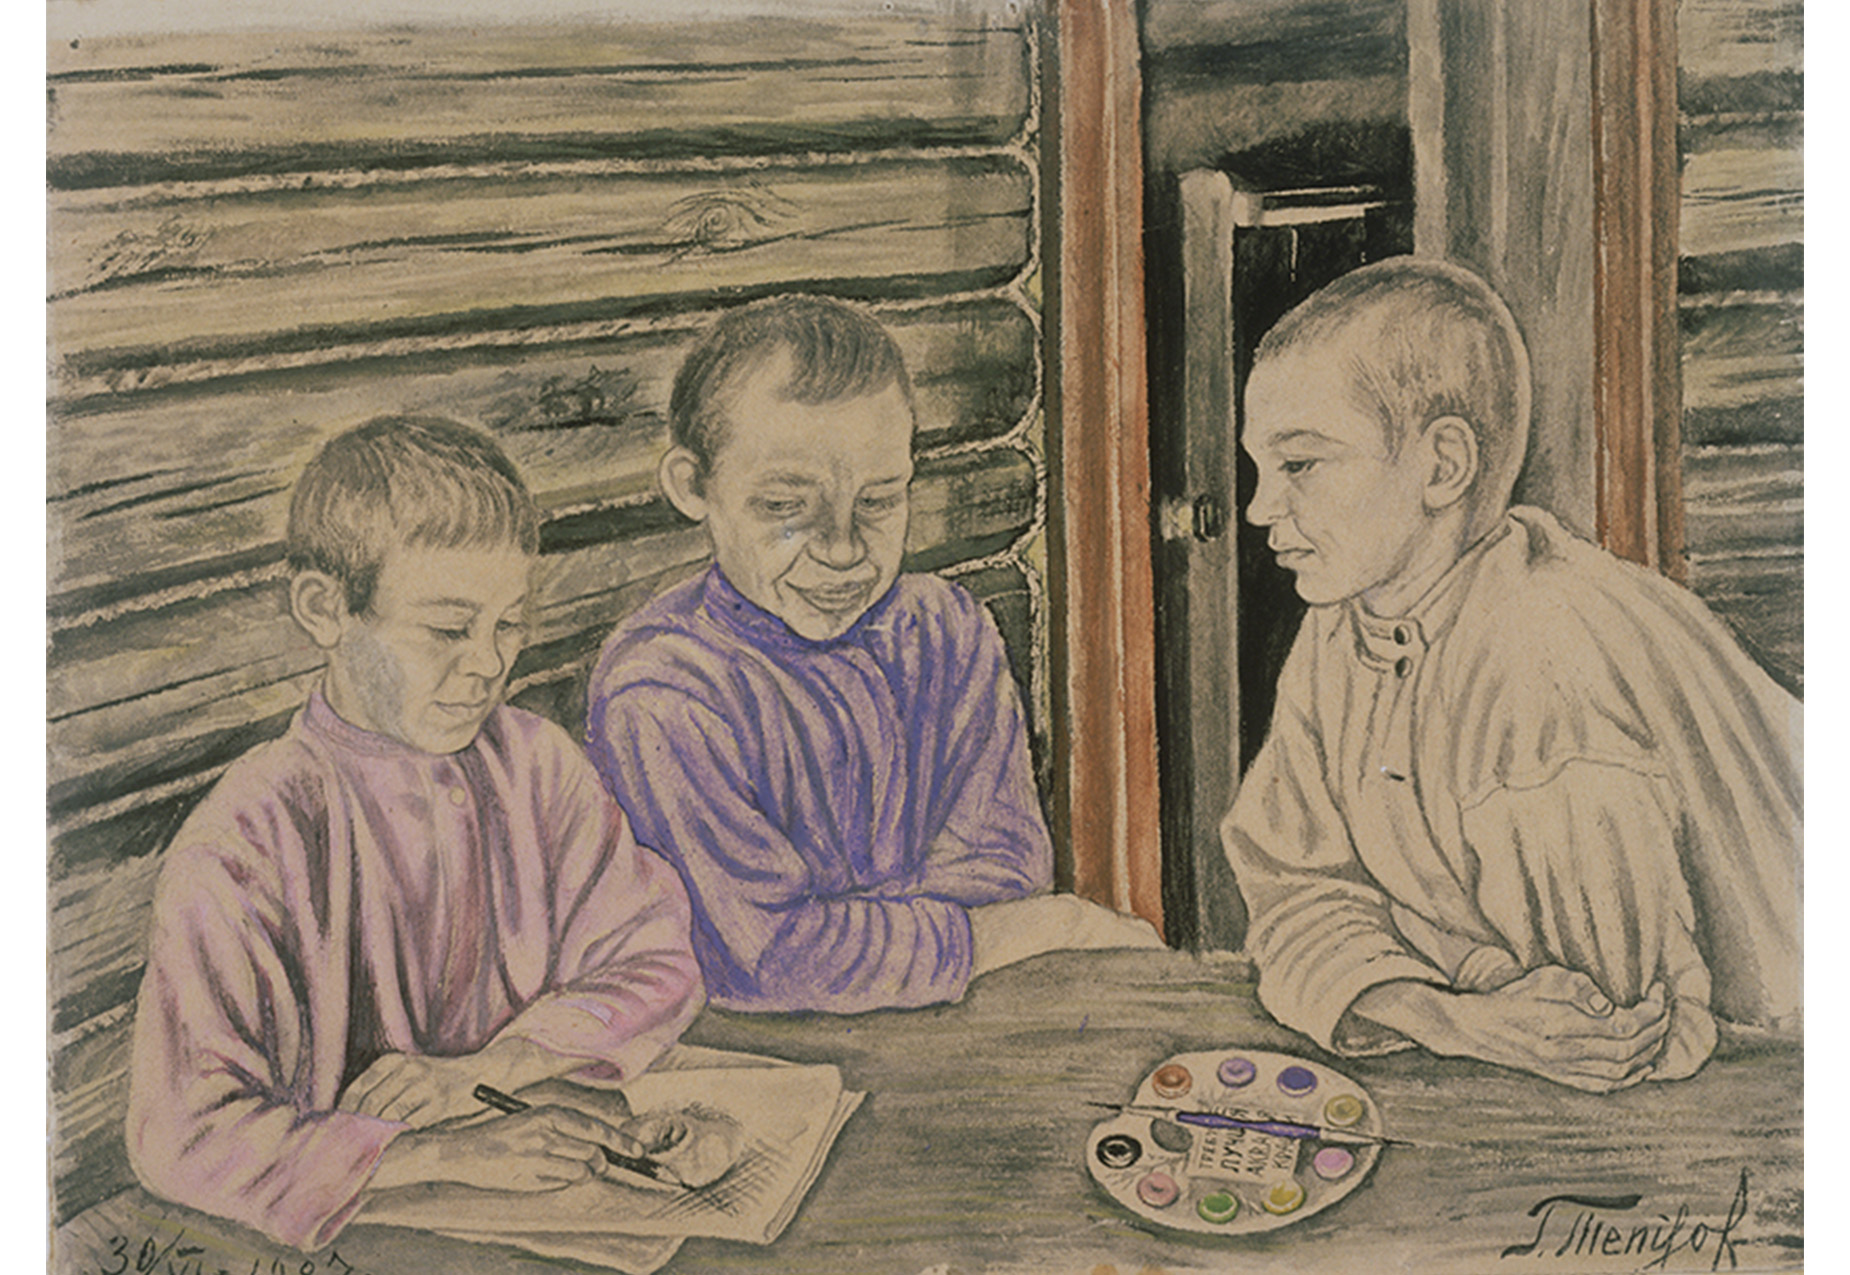 Three boys in a log cabin each wearing a loose long sleeved collarless shirt, each with short hair, all seated at a table. Two of them watch the boy on the left working on a drawing. Watercolor set between them